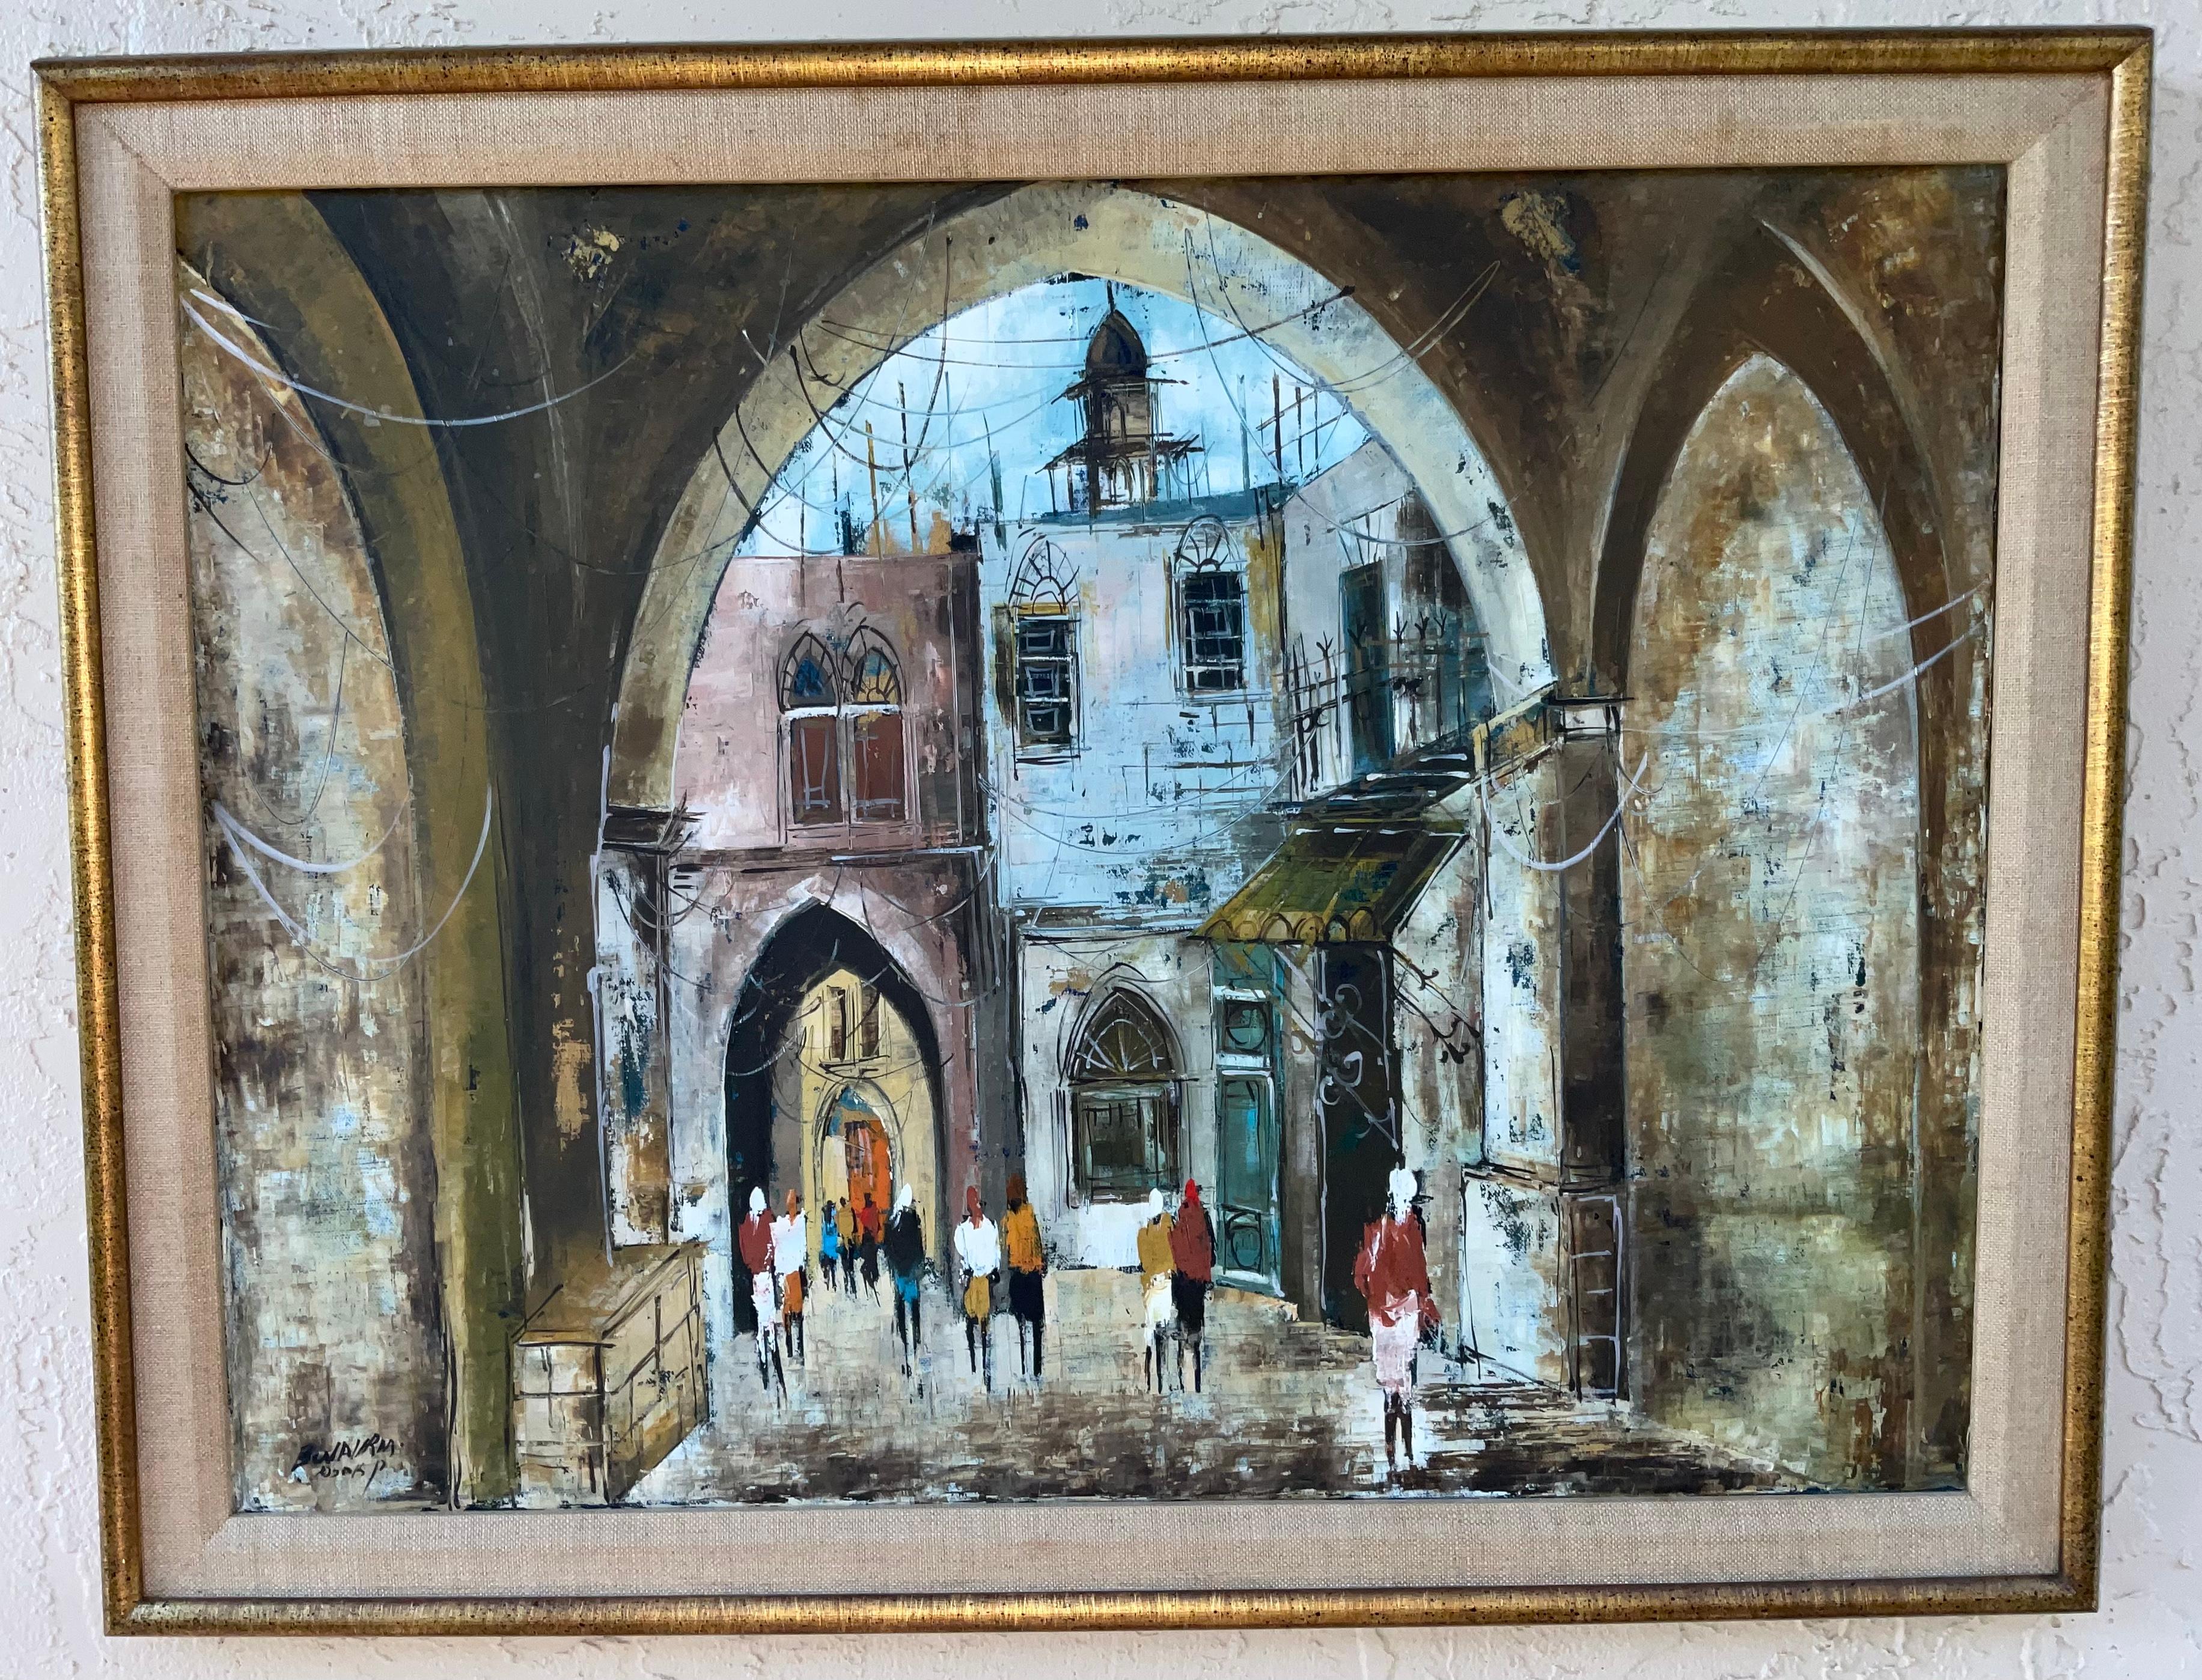 Exceptional oil painting of of street view of the old city in Jerusalem.

Edward Philips, Ben Avram (born 1941) is an artist who was born in Bombay, India and immigrated to Israel as a teenager.[1] He graduated from the Bezalel Academy of Art and